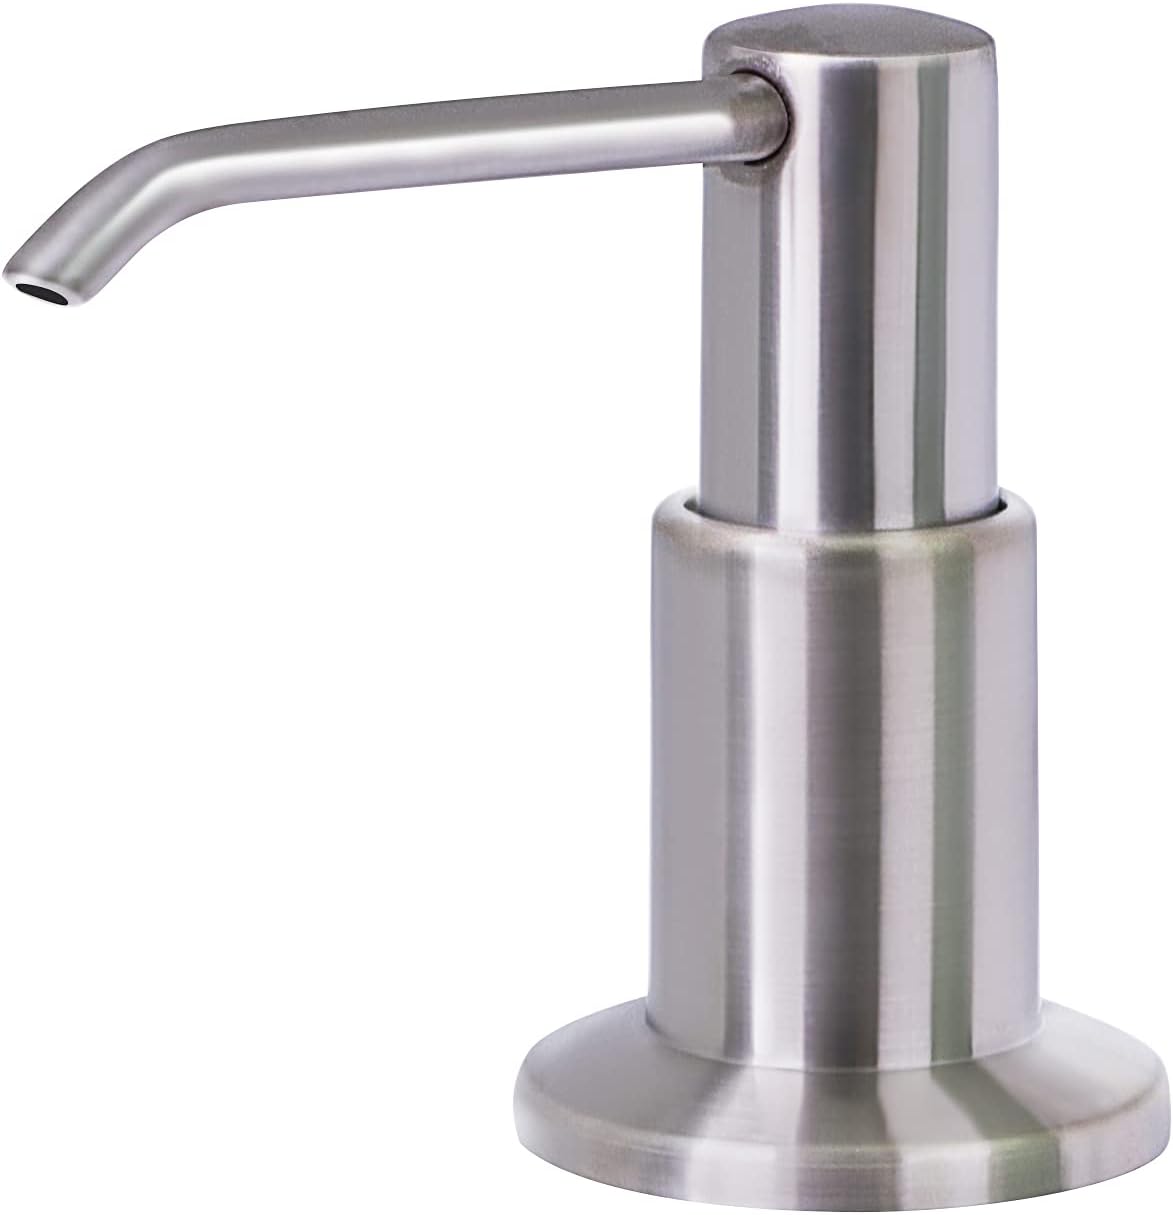 PlumBoss E1000 Built in Soap Dispenser for Kitchen Sink Multipurpose Stainless Steel Pump with 500mL Bottle for Dish Lotion, and Hand Sa